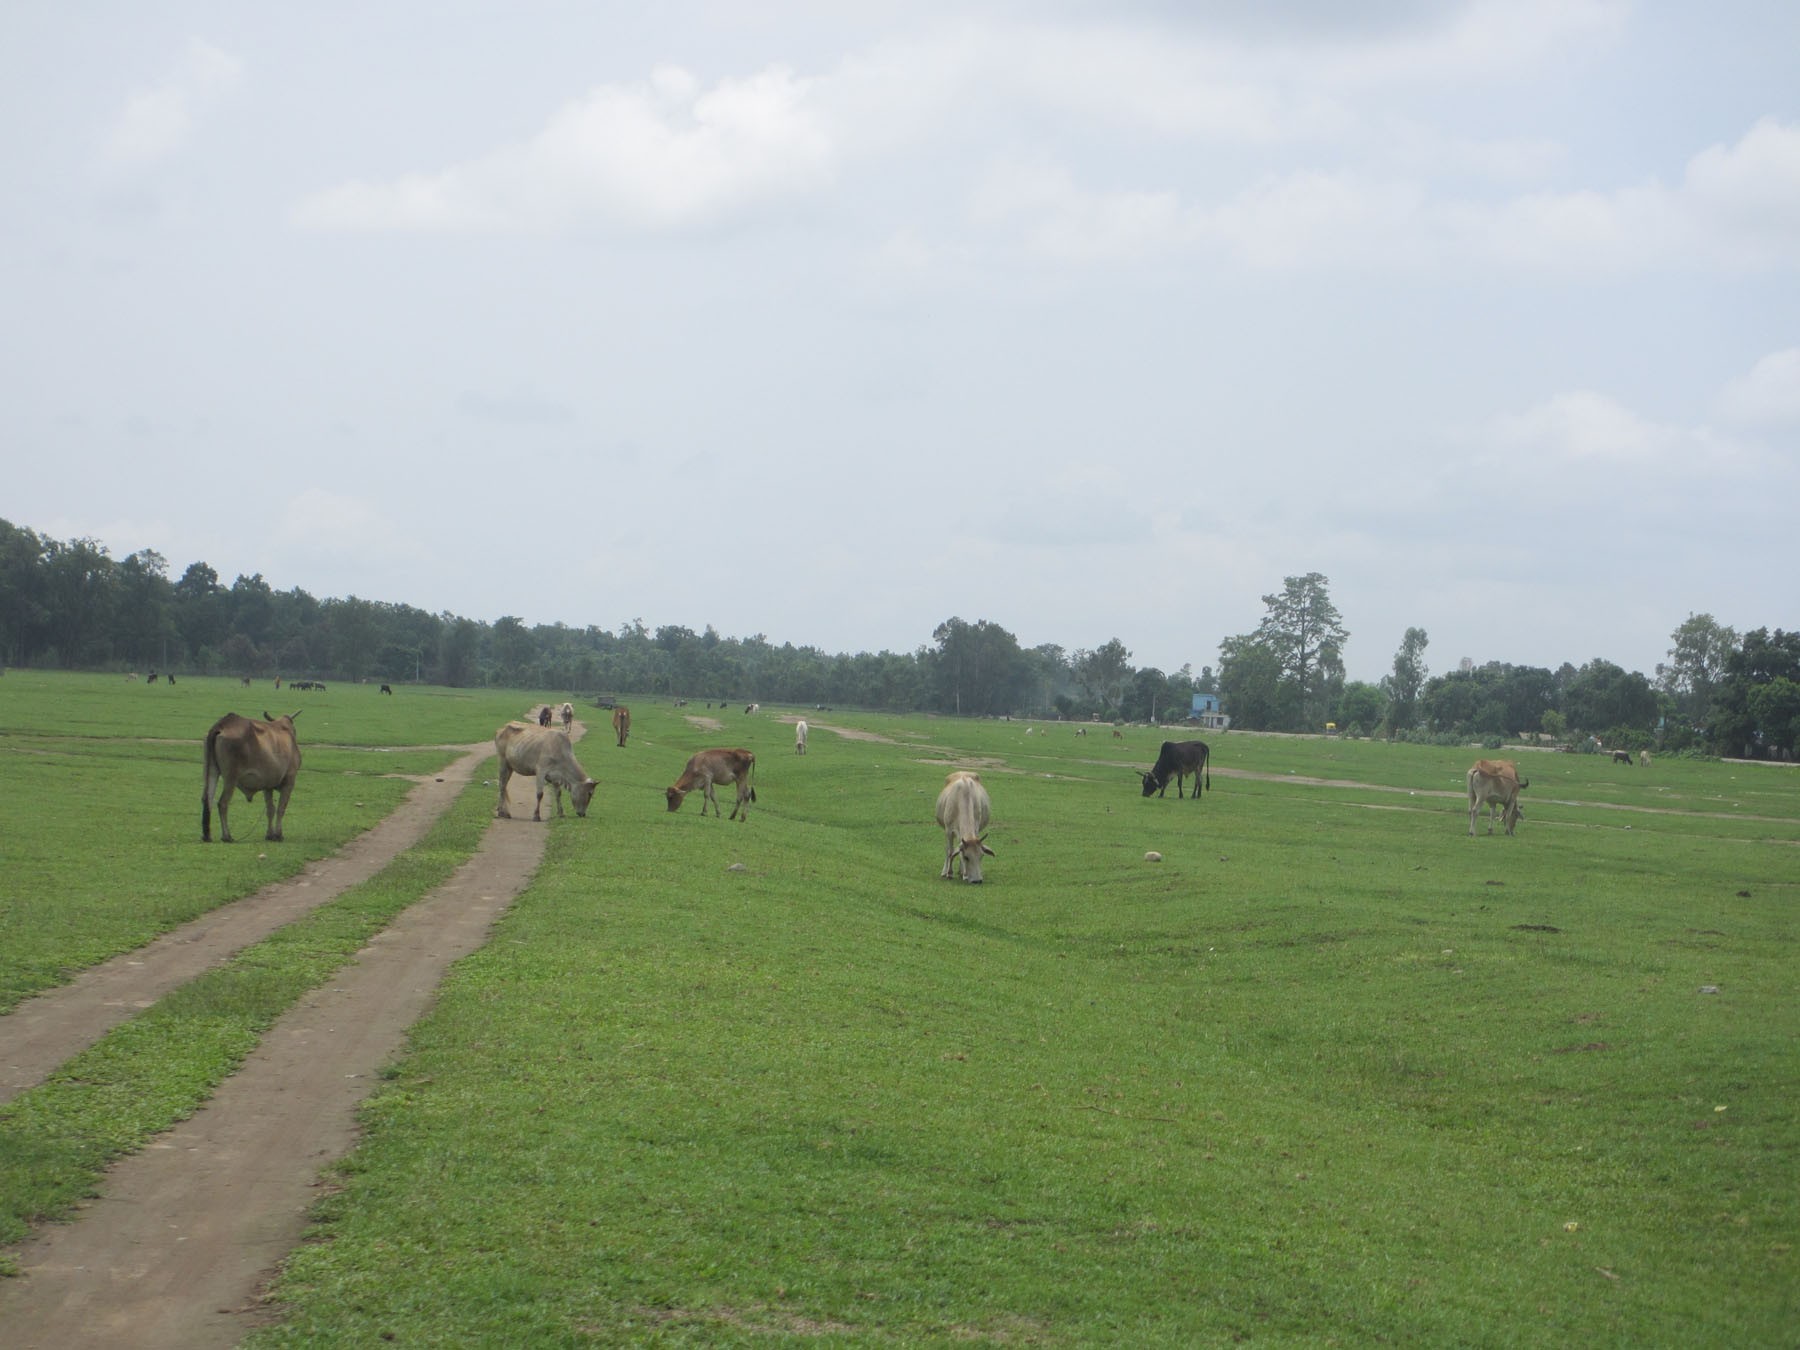 majhgaun-airport-of-kanchanpur-district-which-was-closed-blaming-security-situation-two-decades-ago-has-now-turned-into-a-cattle-grazing-field-july-17